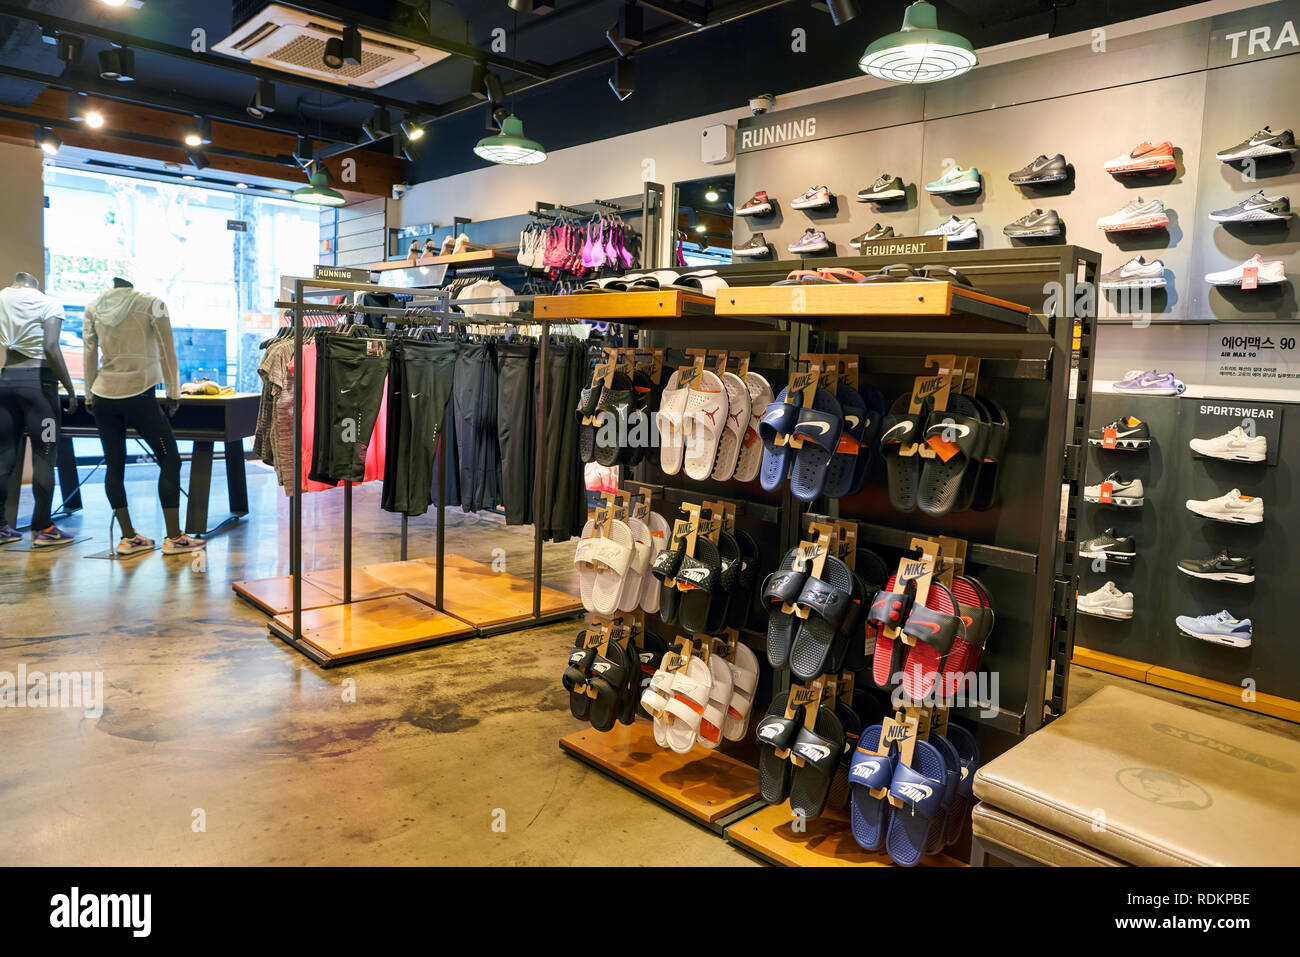 Page 9 - Nike Store High Resolution Stock Photography and Images - Alamy